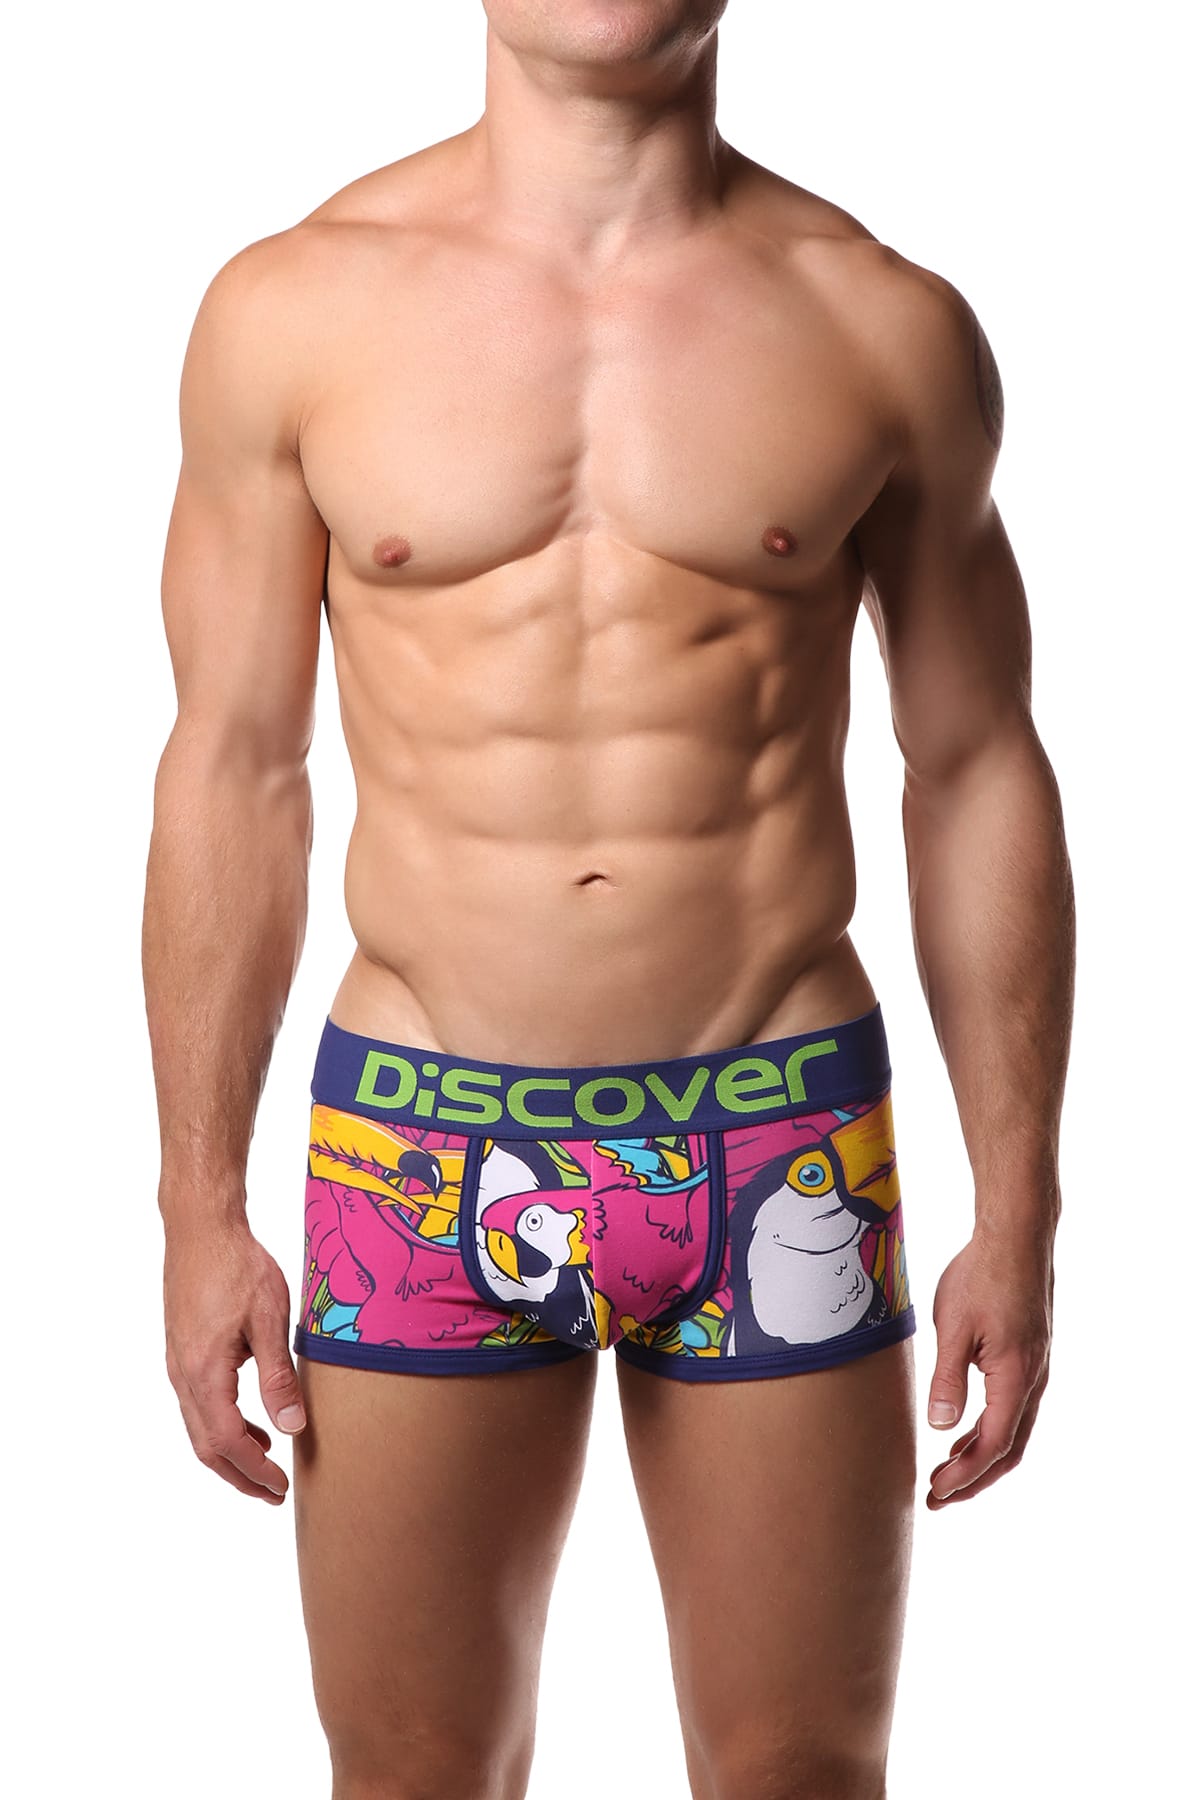 Discover Tucan Trunk